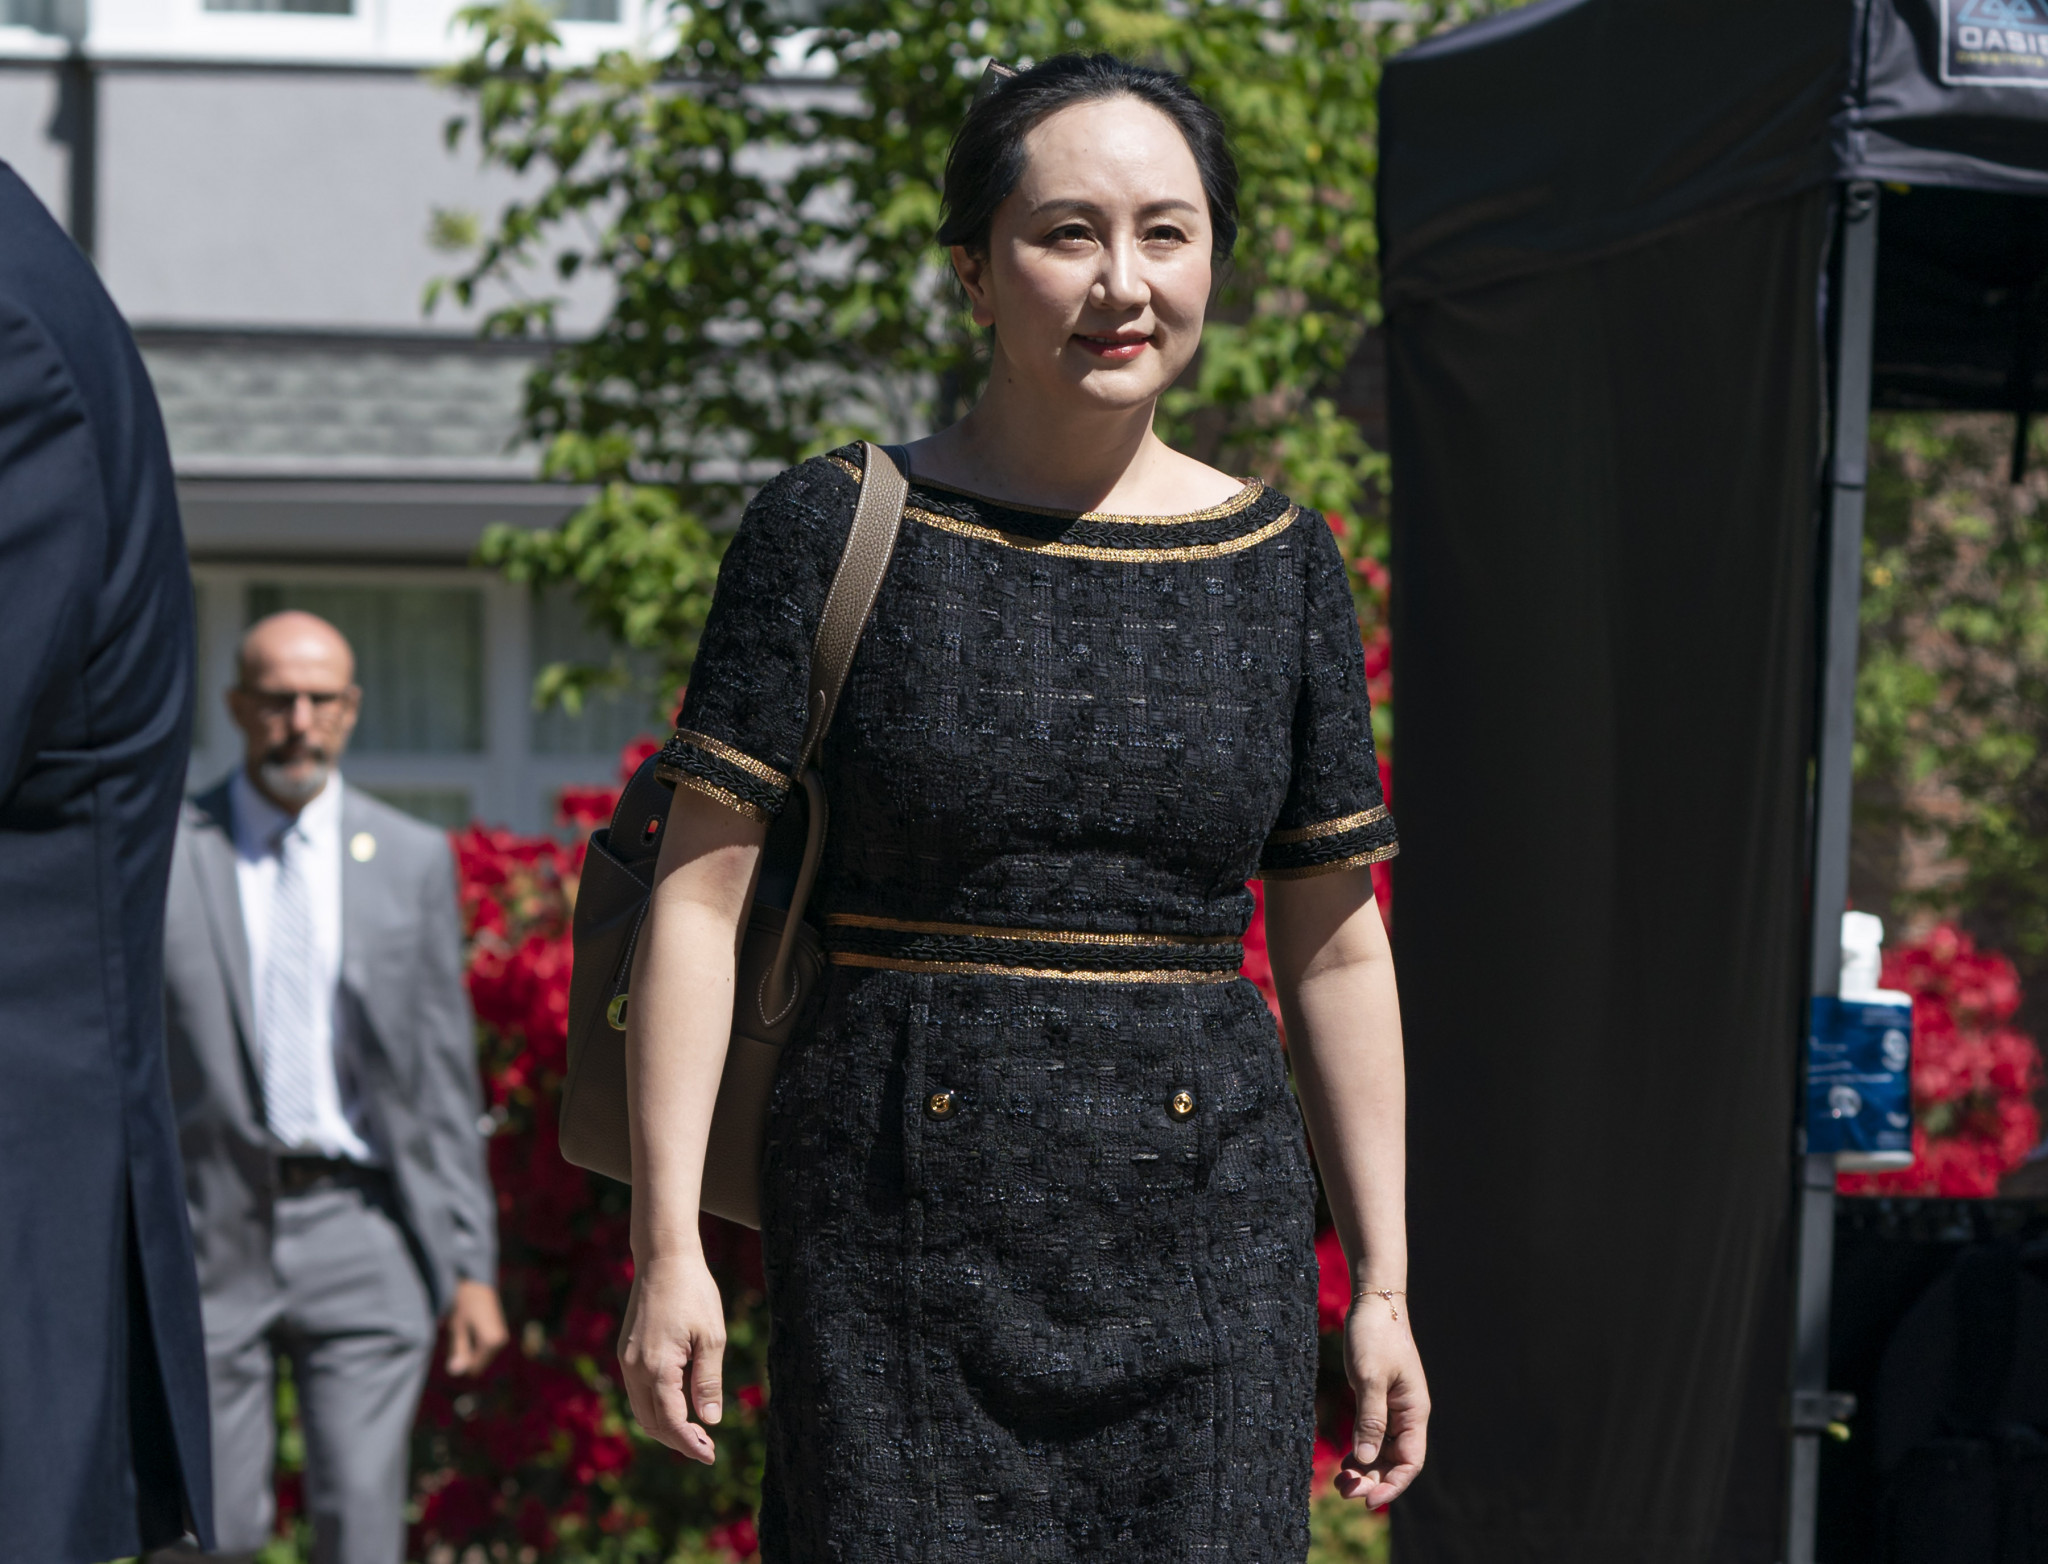 Tensions are high between China and Canada, with a Canadian court due to decide later this year whether to extradite senior Huawei executive Meng Wanzhou to the United States ©Getty Images